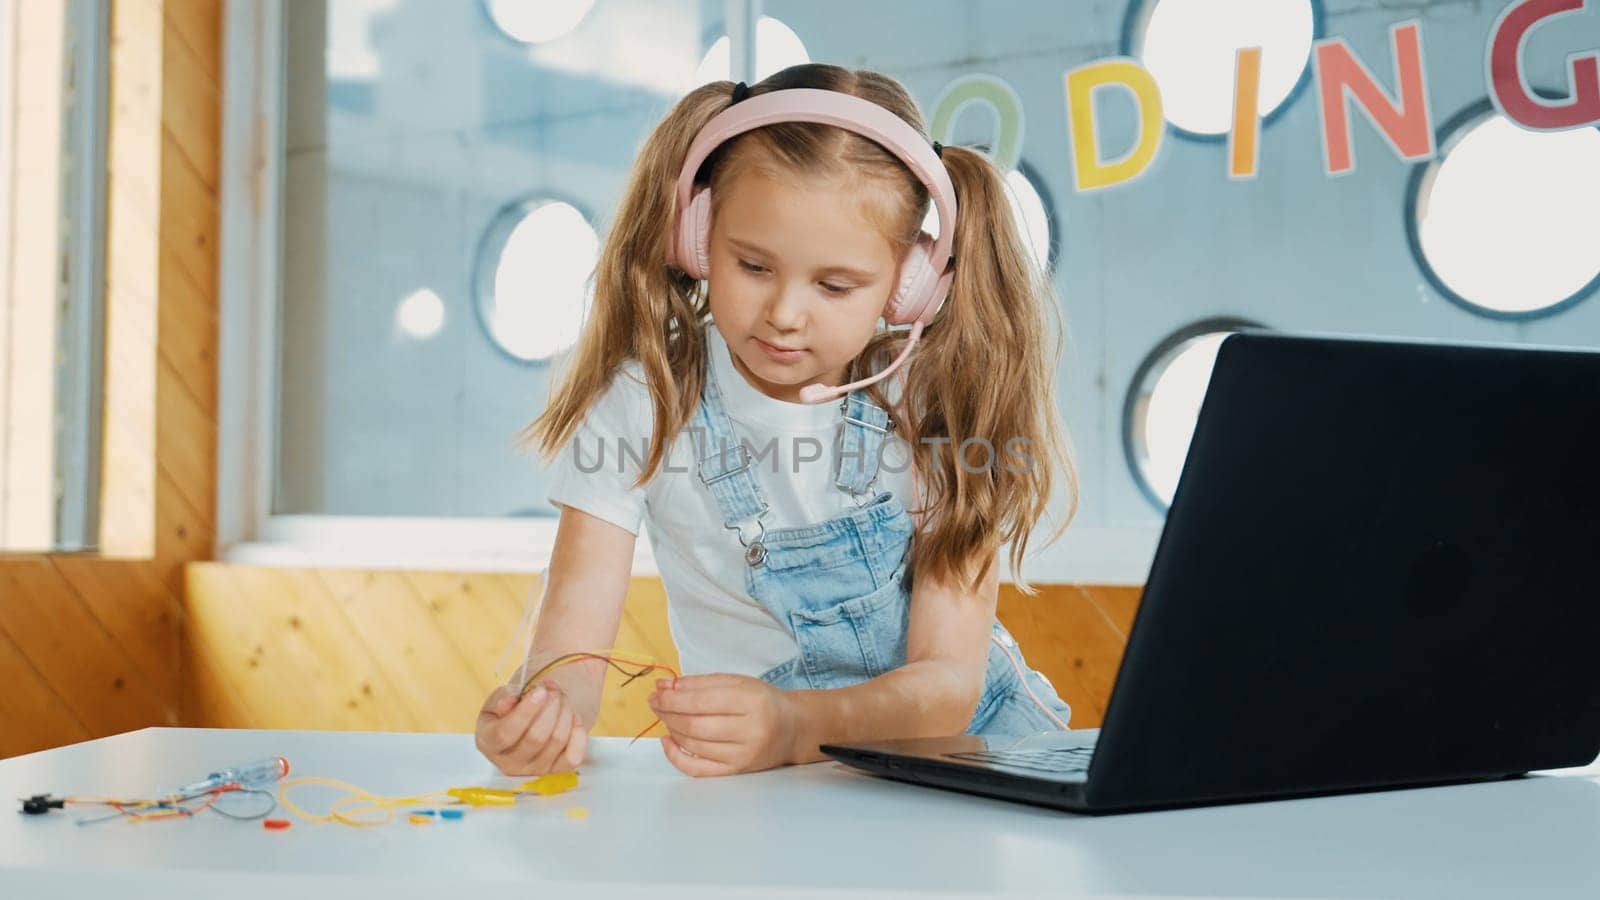 Pretty girl wearing headphone while study electronic equipment. Caucasian child doing science experiment while laptop, screwdriver and wires placed near on table. Smart online classroom. Erudition.